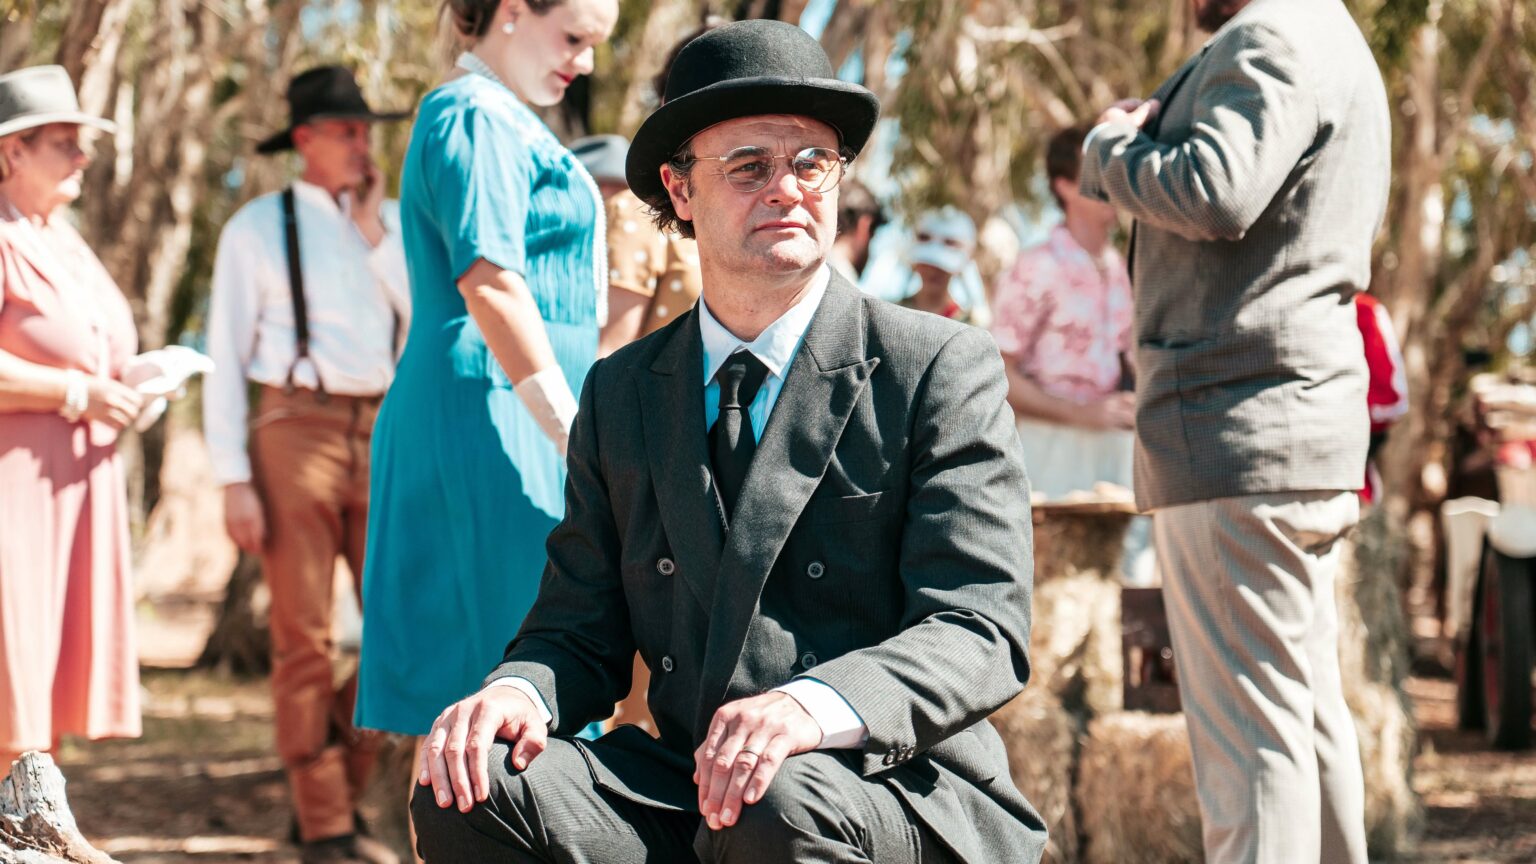 Cloncurry Anticipates the Grand Premiere of 'The Bank Manager', a Film Rooted in its History